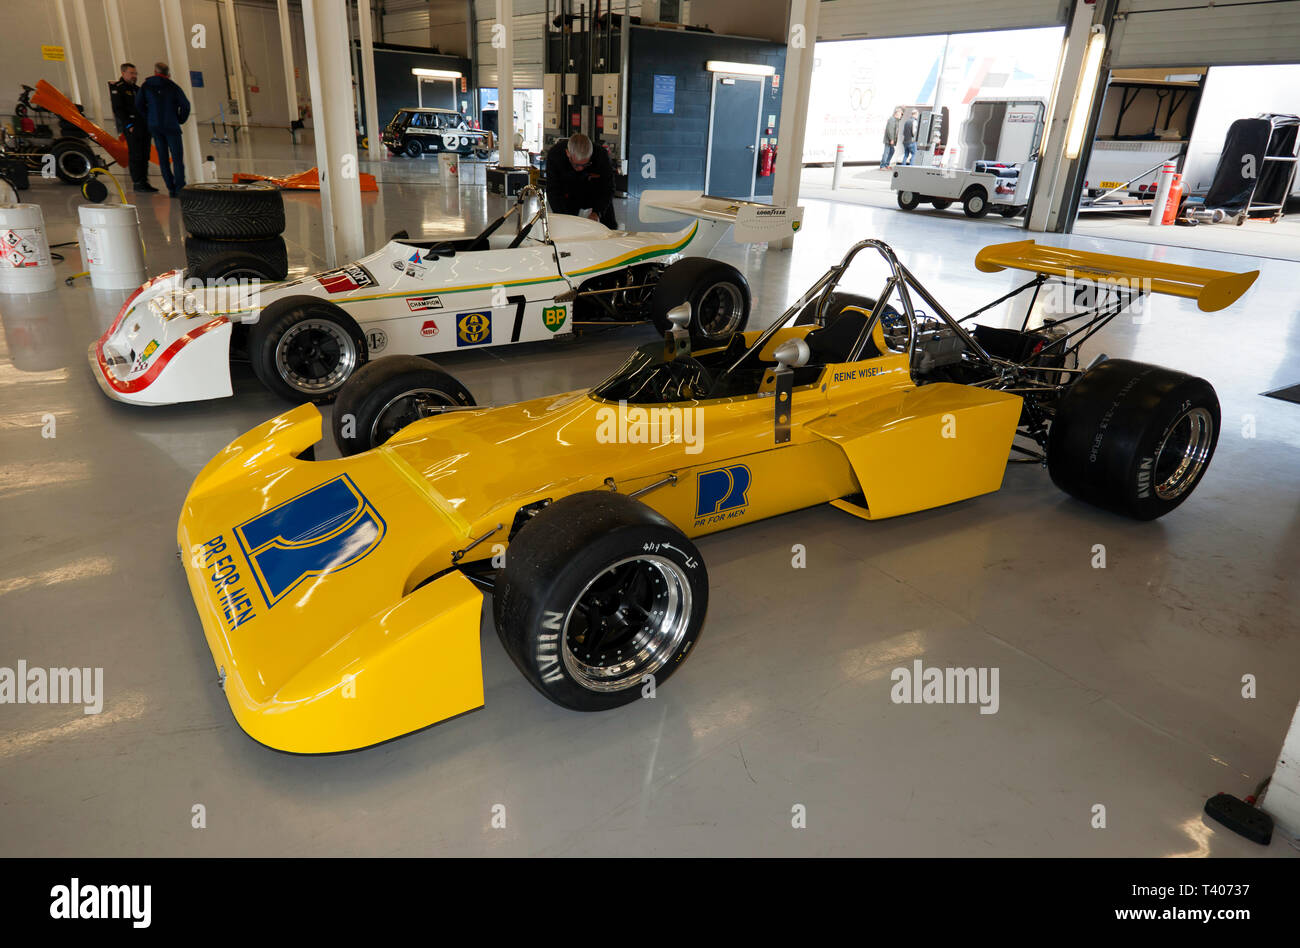 Historic Formula 2 Race Car previously driven by Reine Wisell, in the International Pit Garage, during the 2019 Silverstone Classic Media/Test Day Stock Photo